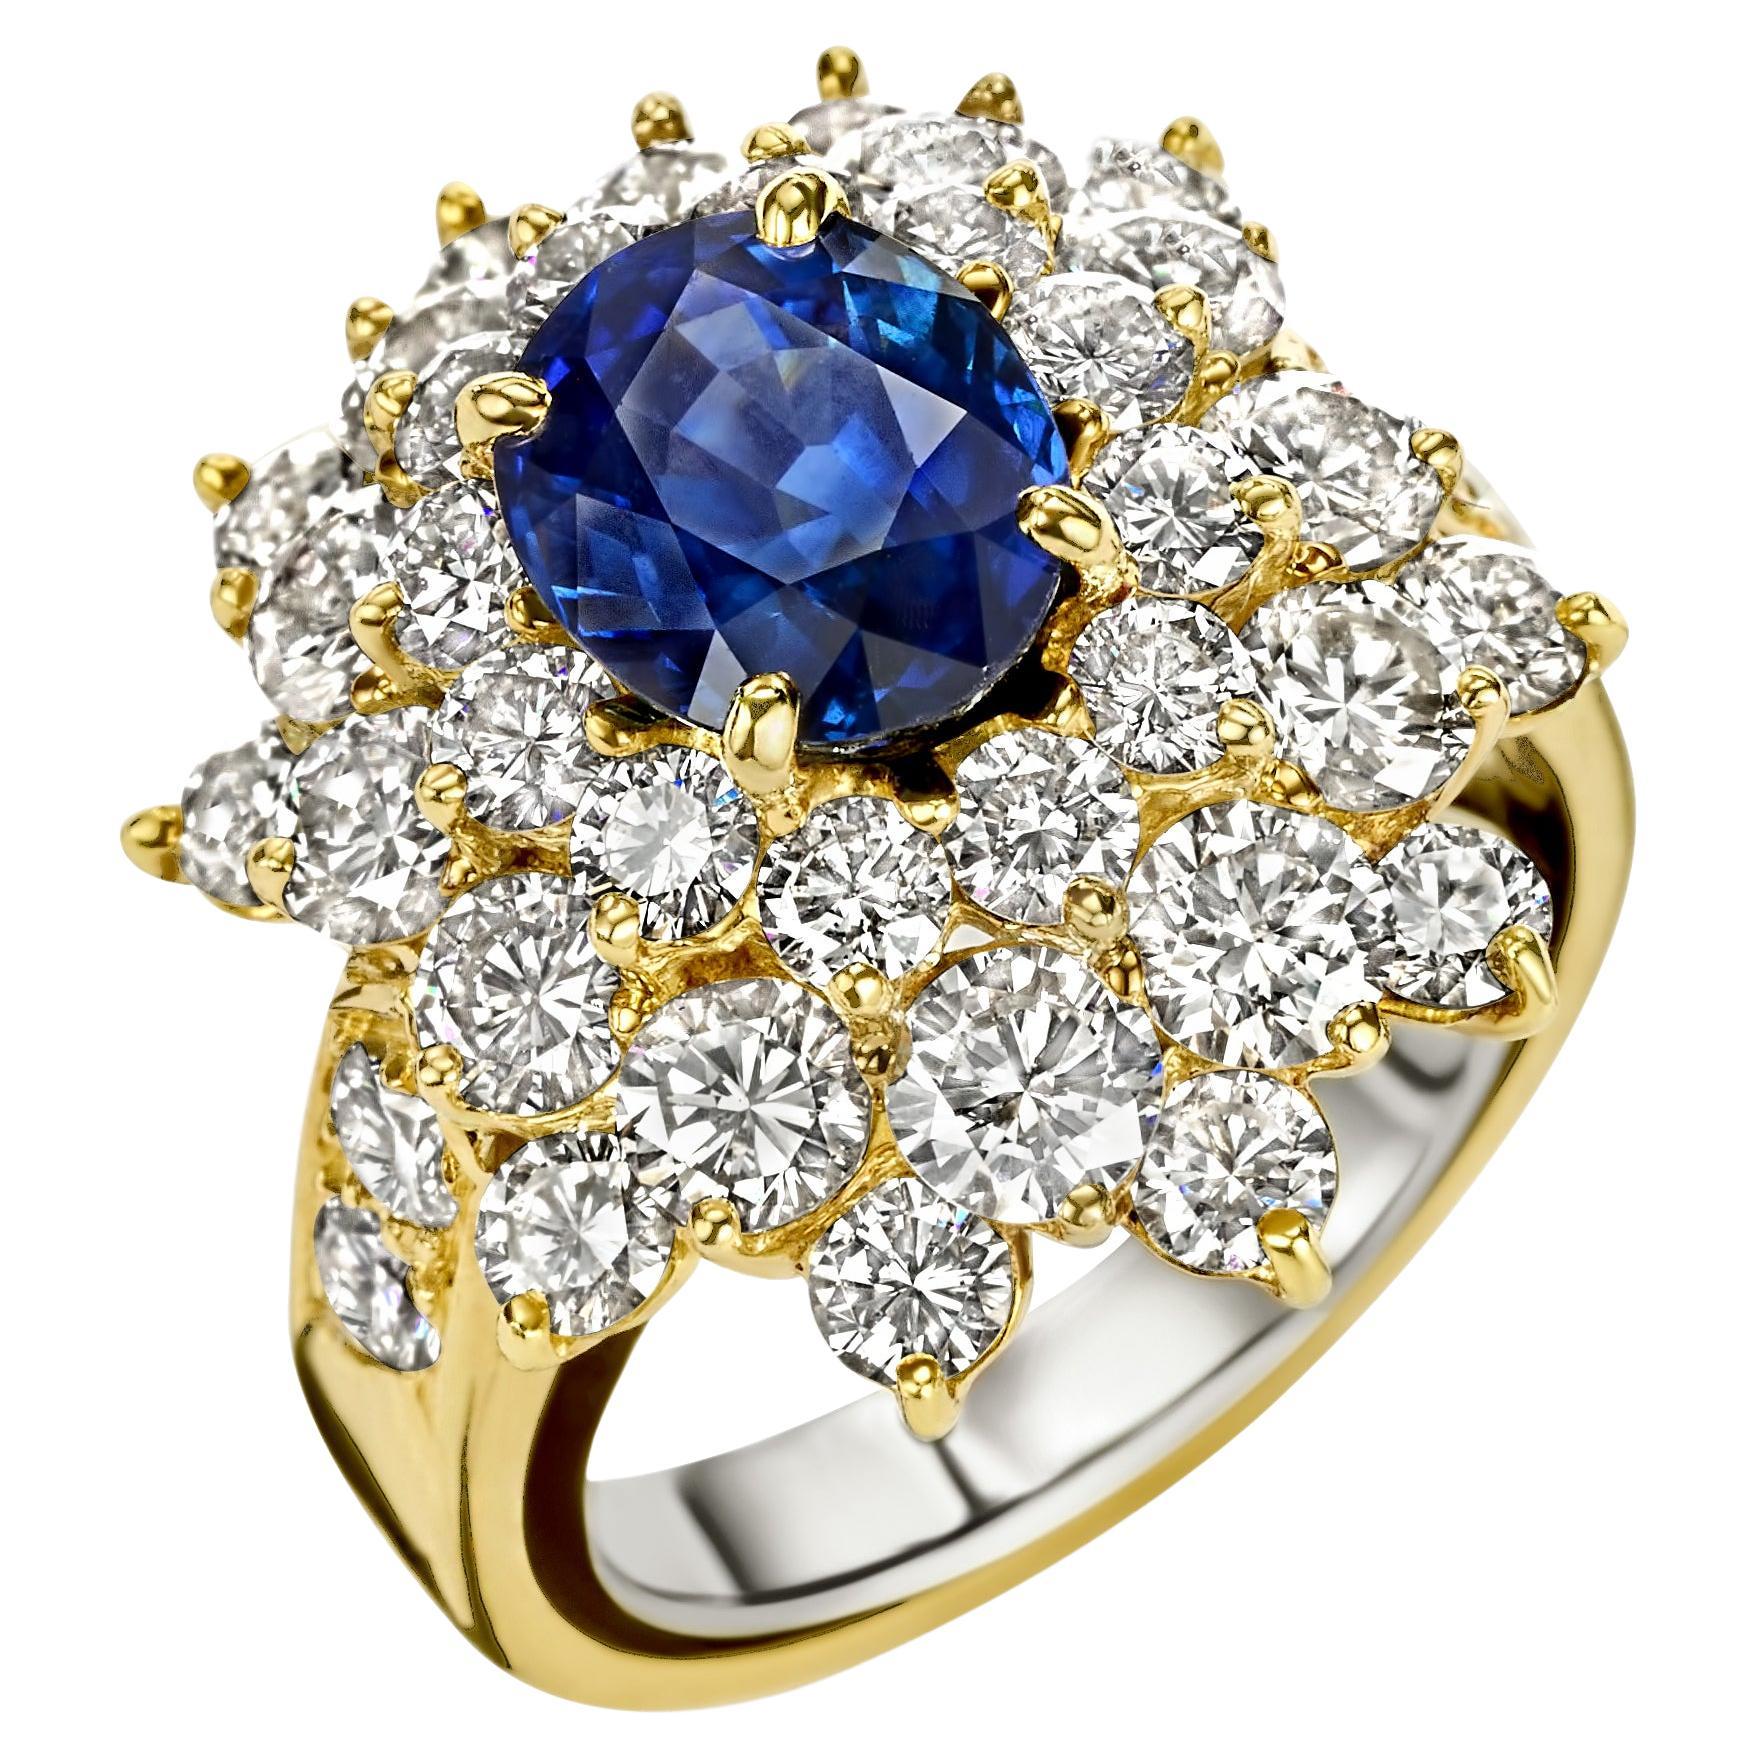 18 kt Yellow Gold Ring with 2ct Sapphire and 2.8ct Diamonds, Estate Sultan Oman For Sale